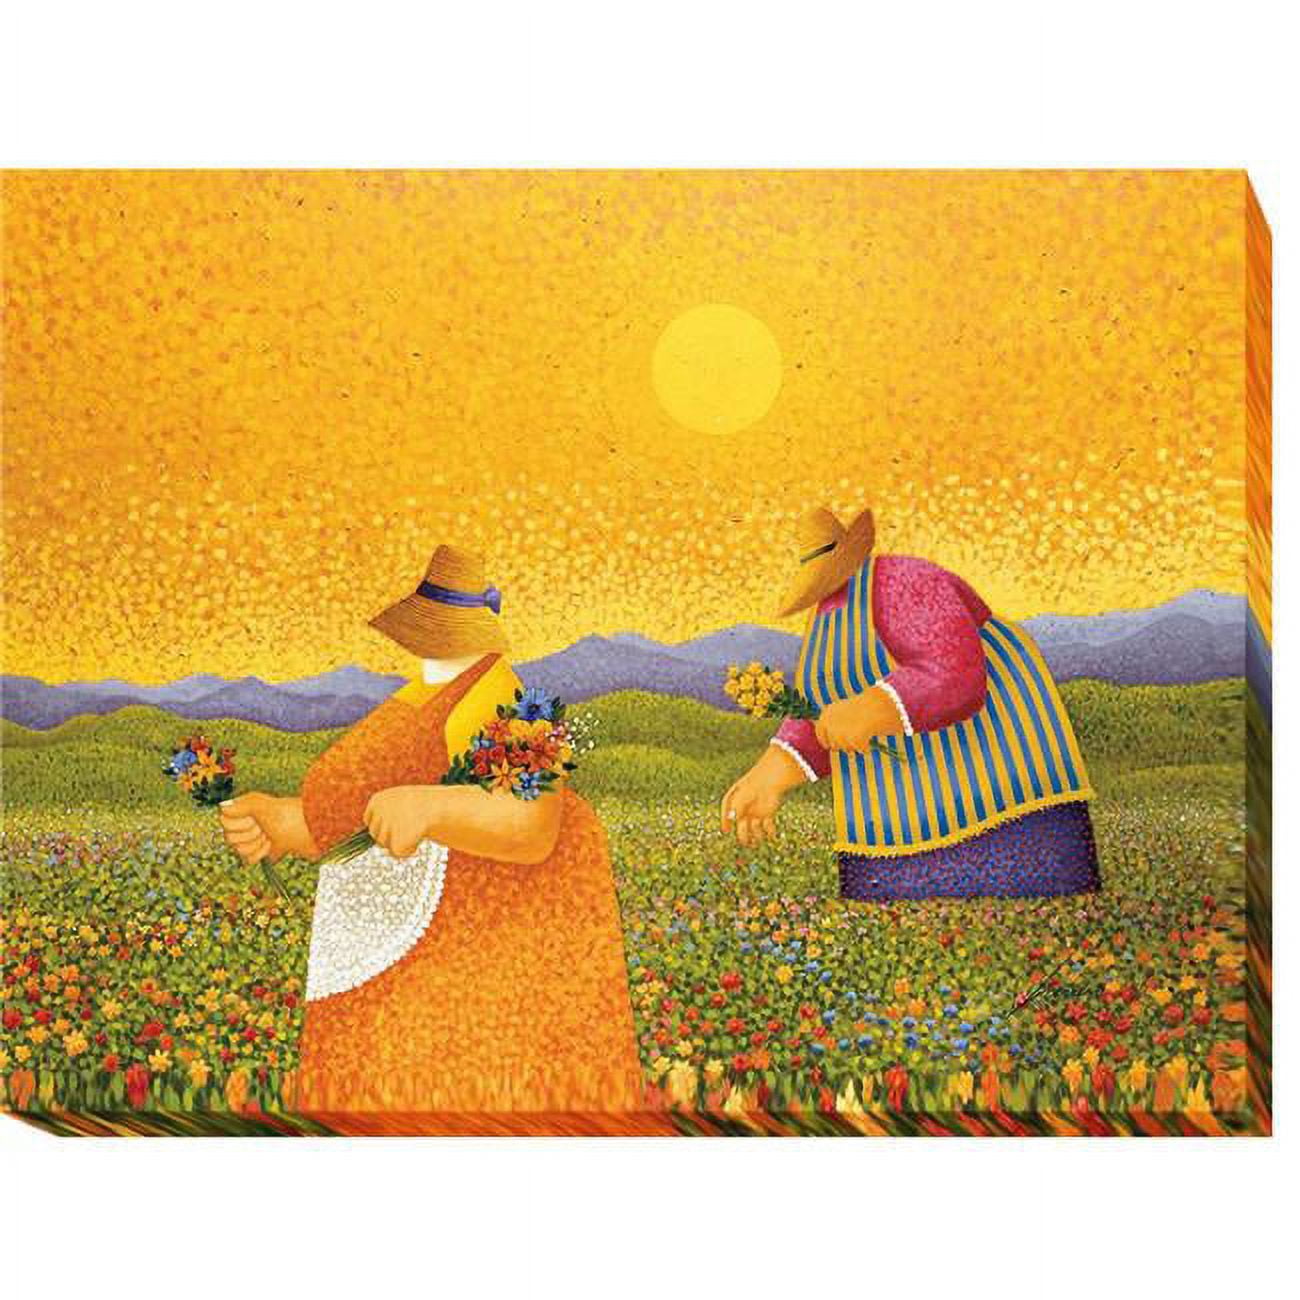 1216o394ig Picking Wildflowers By Lowell Herrero Premium Gallery-wrapped Canvas Giclee Art - 12 X 16 X 1.5 In.